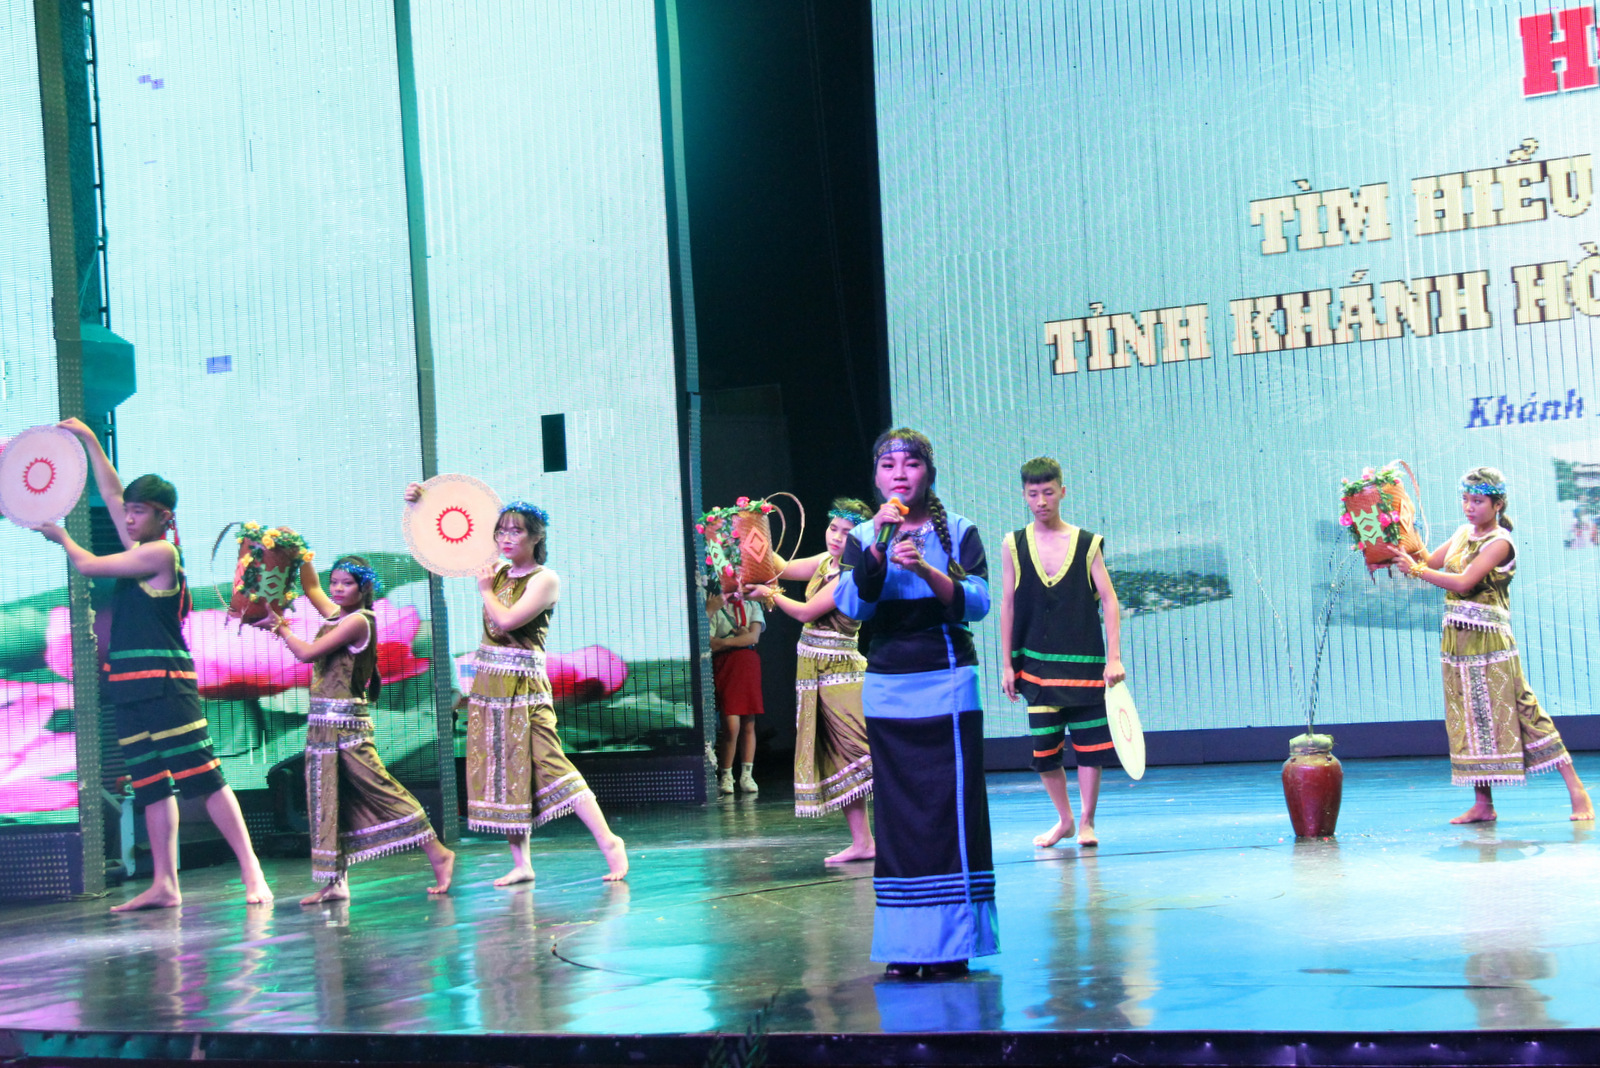 Khanh Son performing “Lễ bỏ mả” (“leaving the grave” rite) of Raglai people.